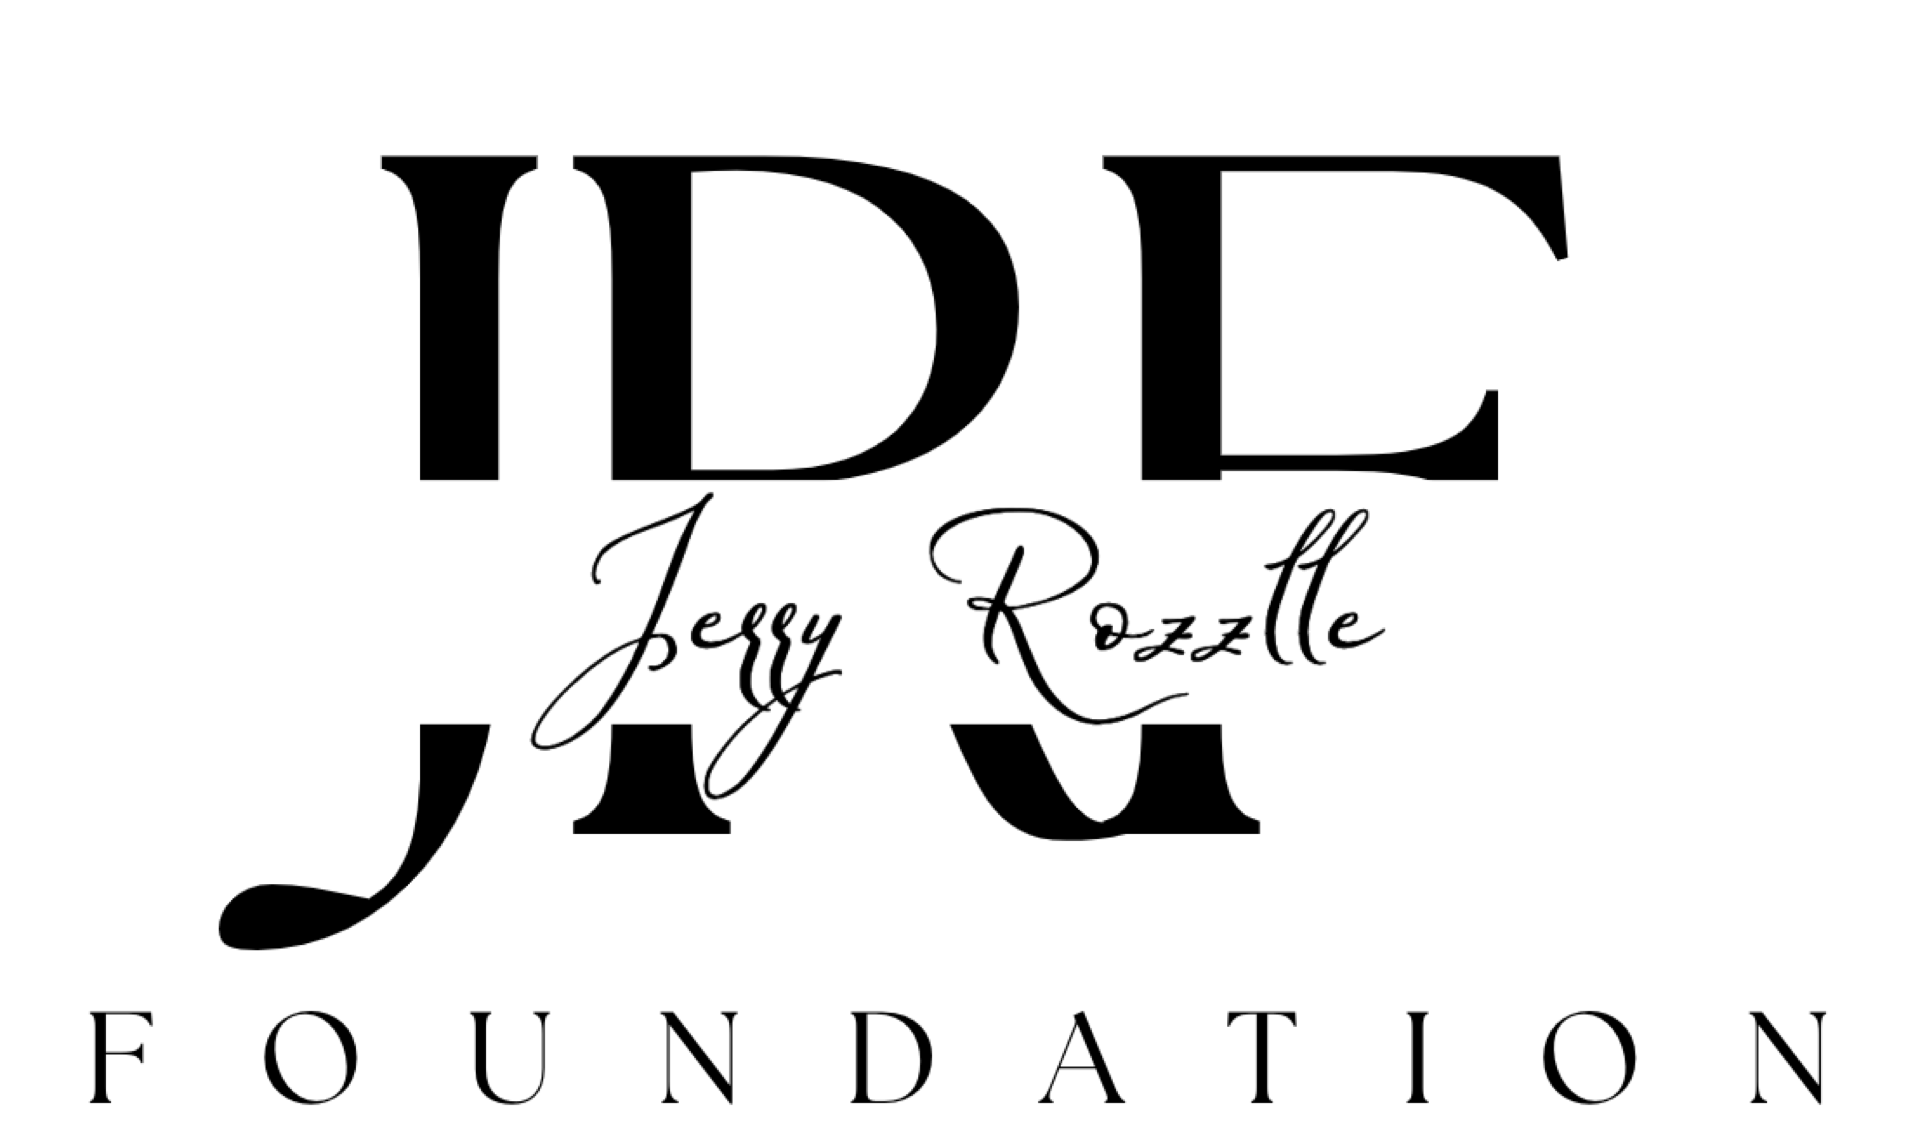 Jerry Rozzlle Foundation 